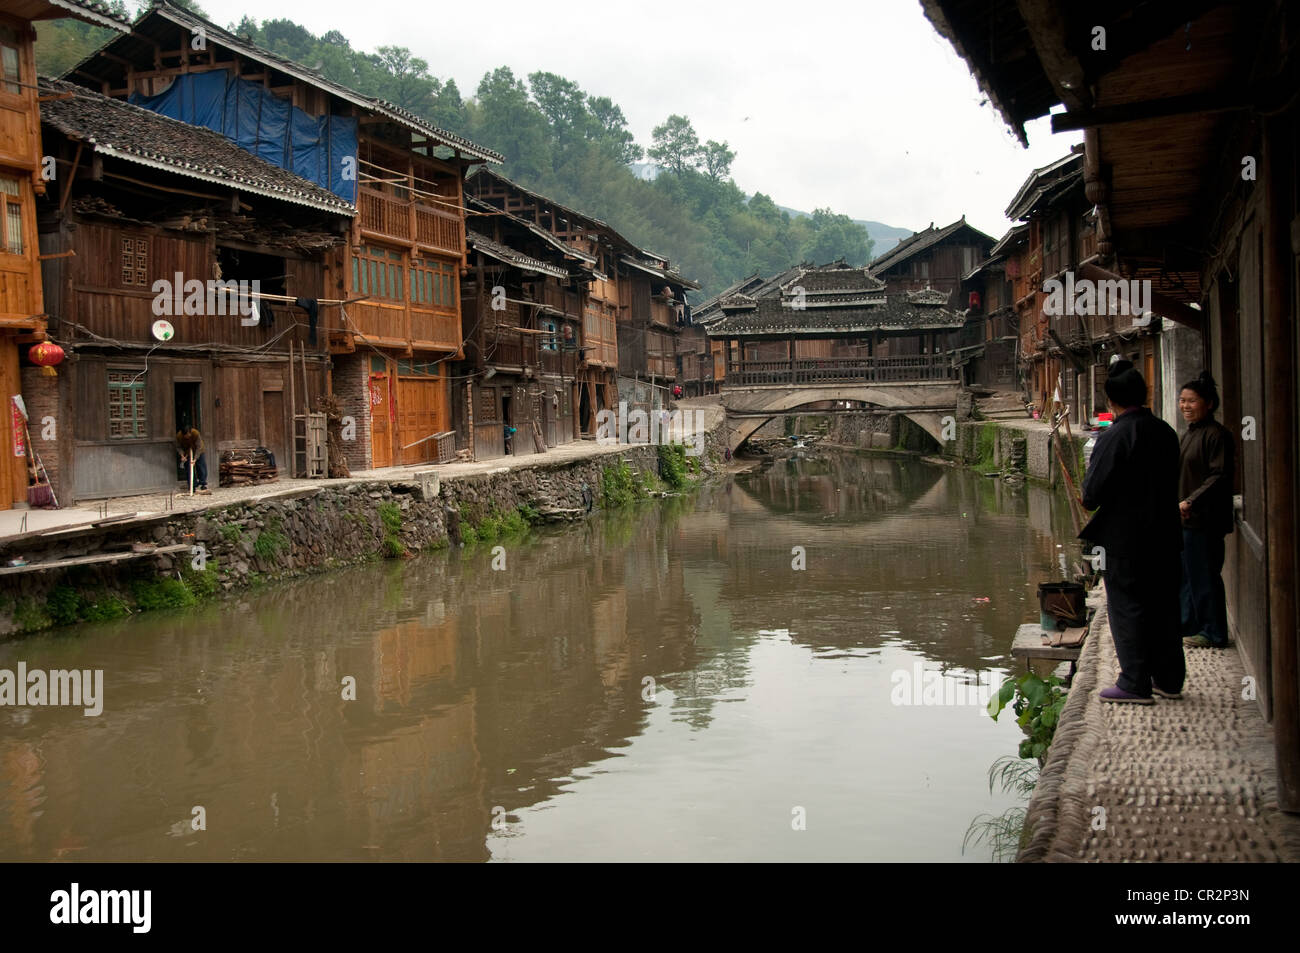 Two Dong women talking on a narrow lane on the side of a stream, a small 'Wind and Rain' bridge, Zhaoxing Dong Village, China Stock Photo